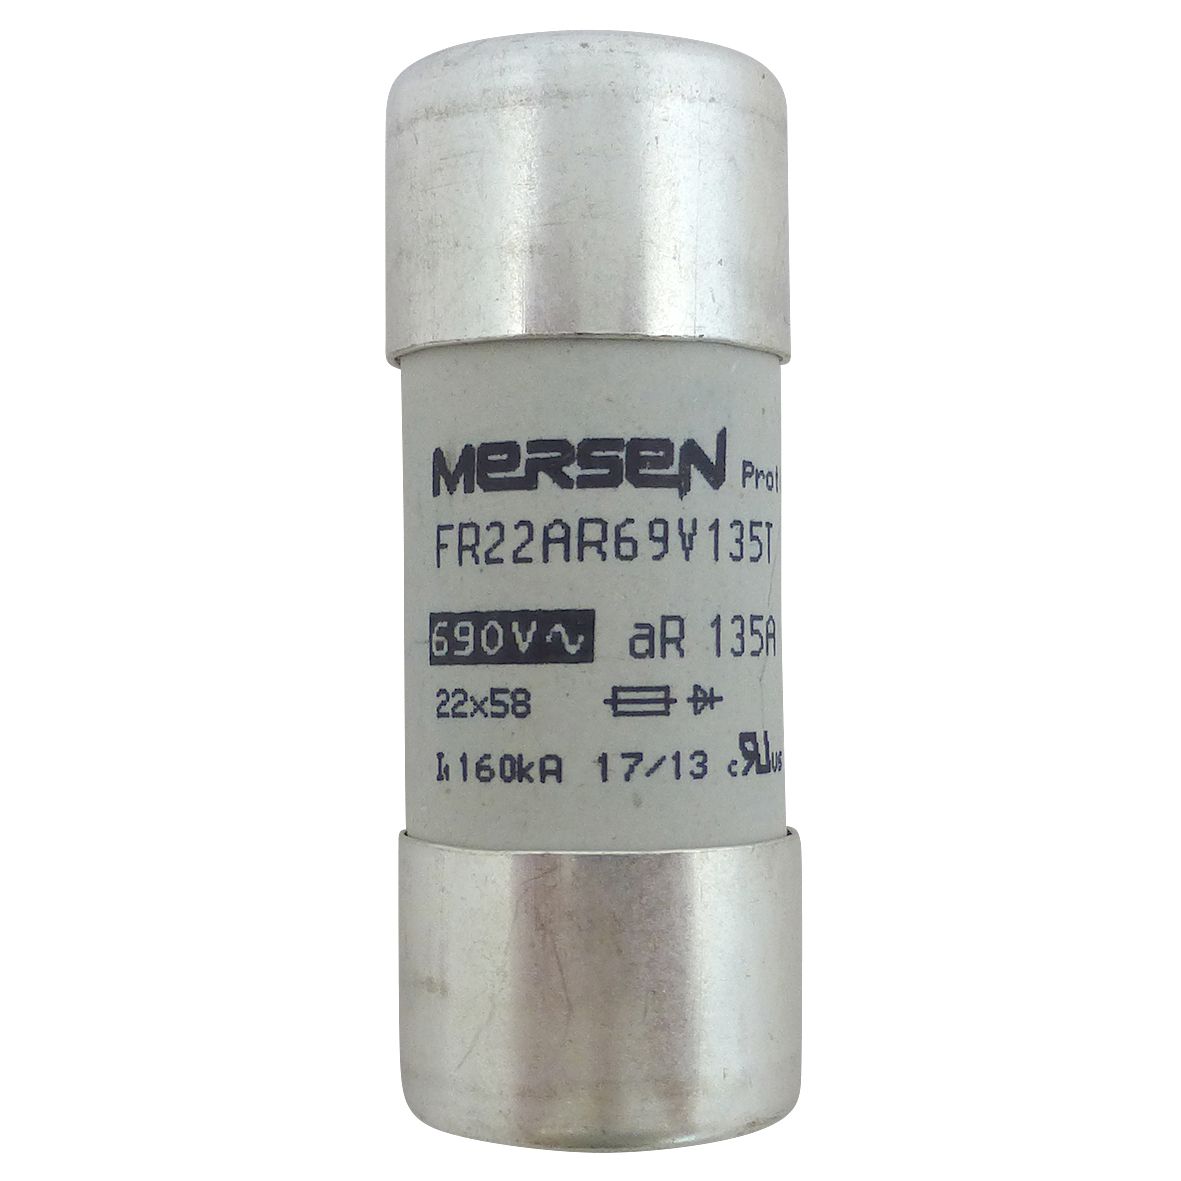 K1056675 - Cylindrical fuse-link aR 690VAC 22x58, 135A, with indicator